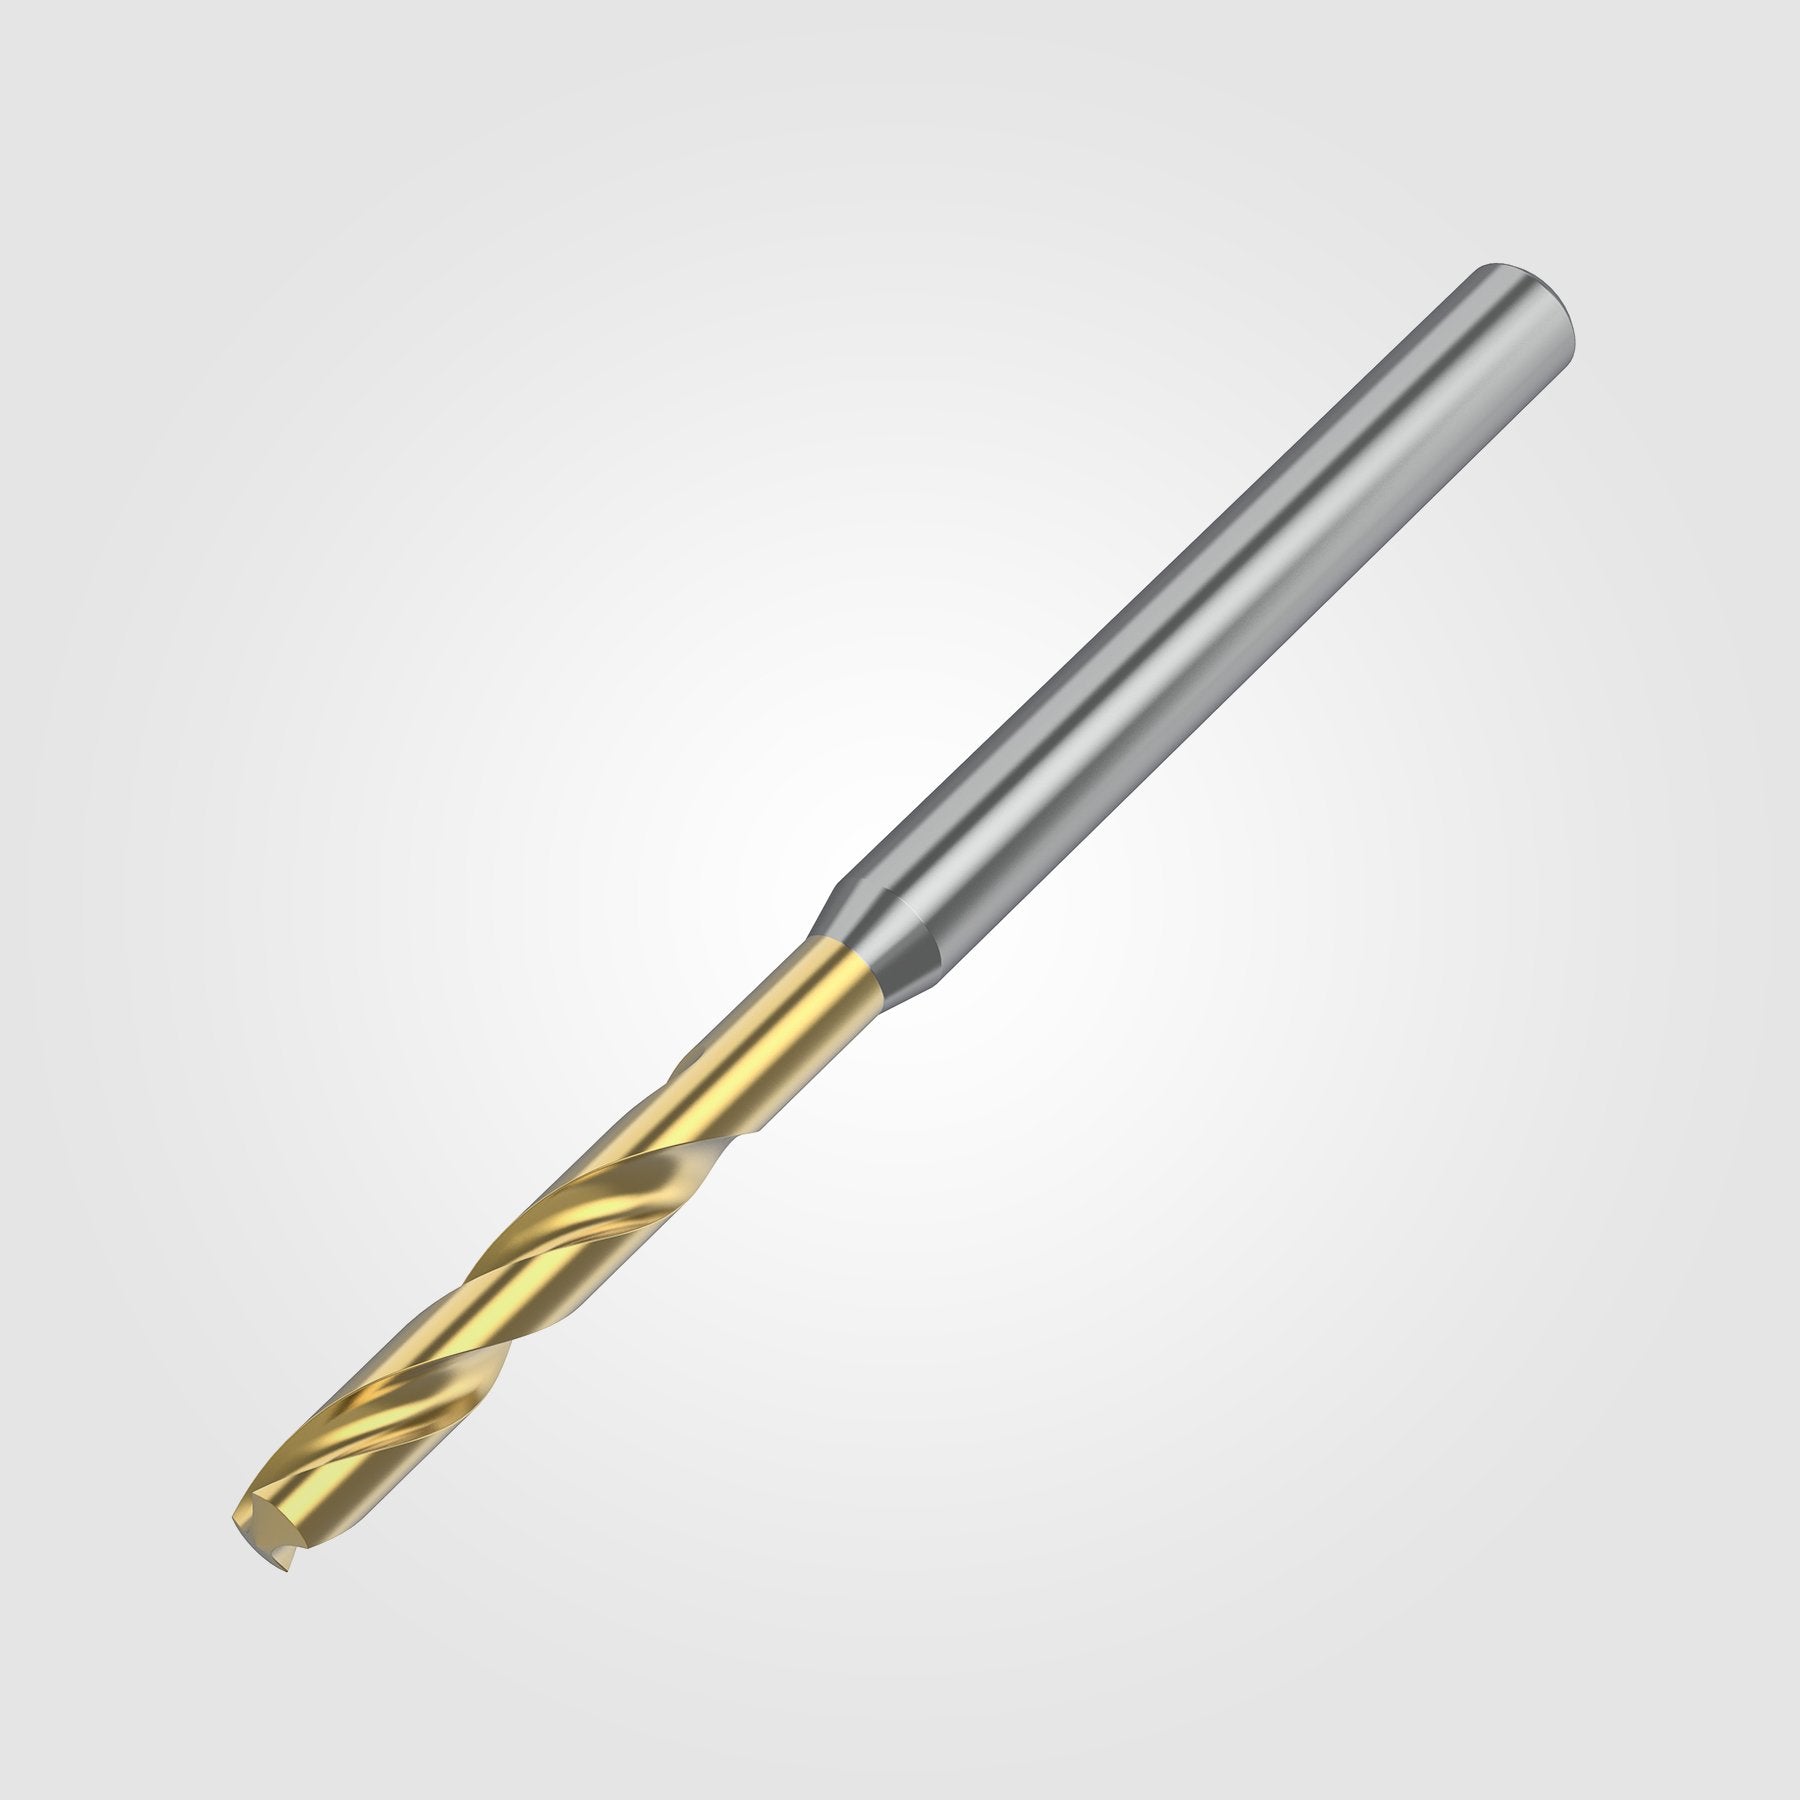 GOdrill (THROUGH COOLANT) | 13.891mm / .5469" / 3xD | SOLID CARBIDE DRILL | 4151250